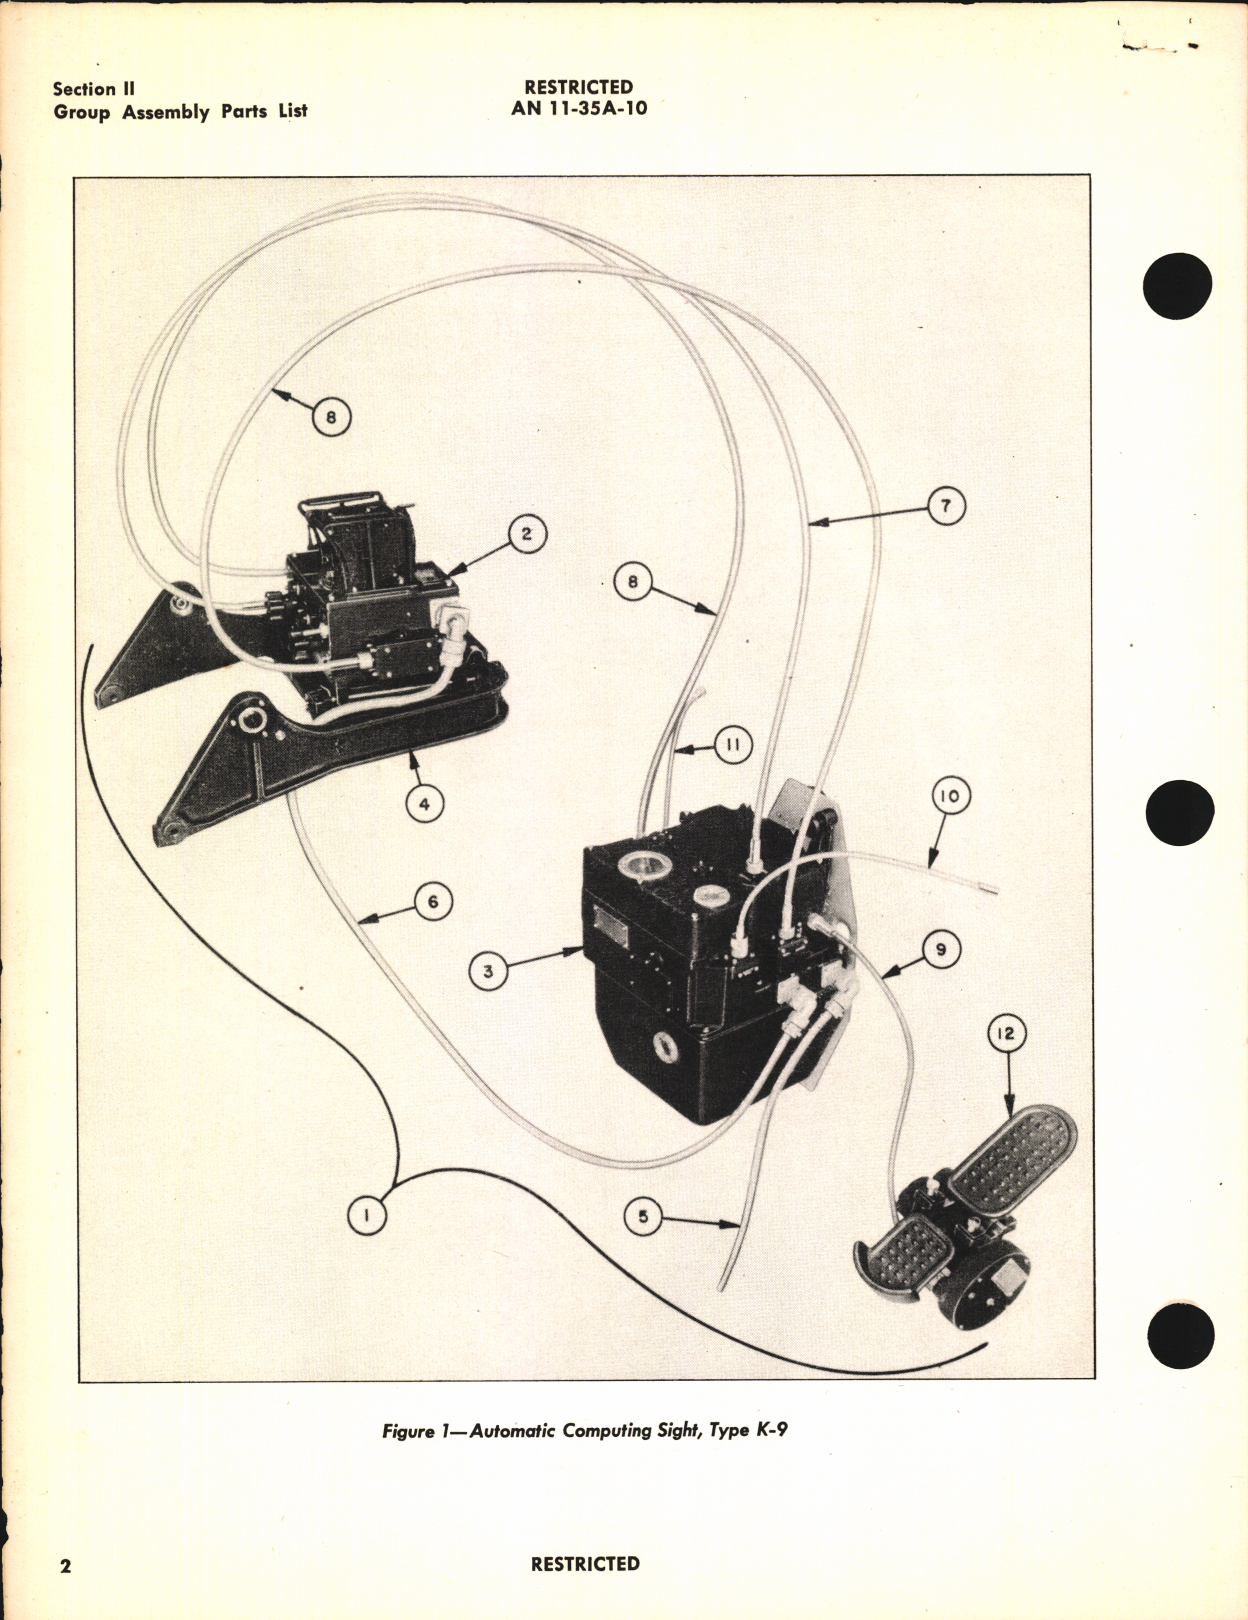 Sample page 6 from AirCorps Library document: Parts Catalog for Type K-9 Automatic Computing Sight